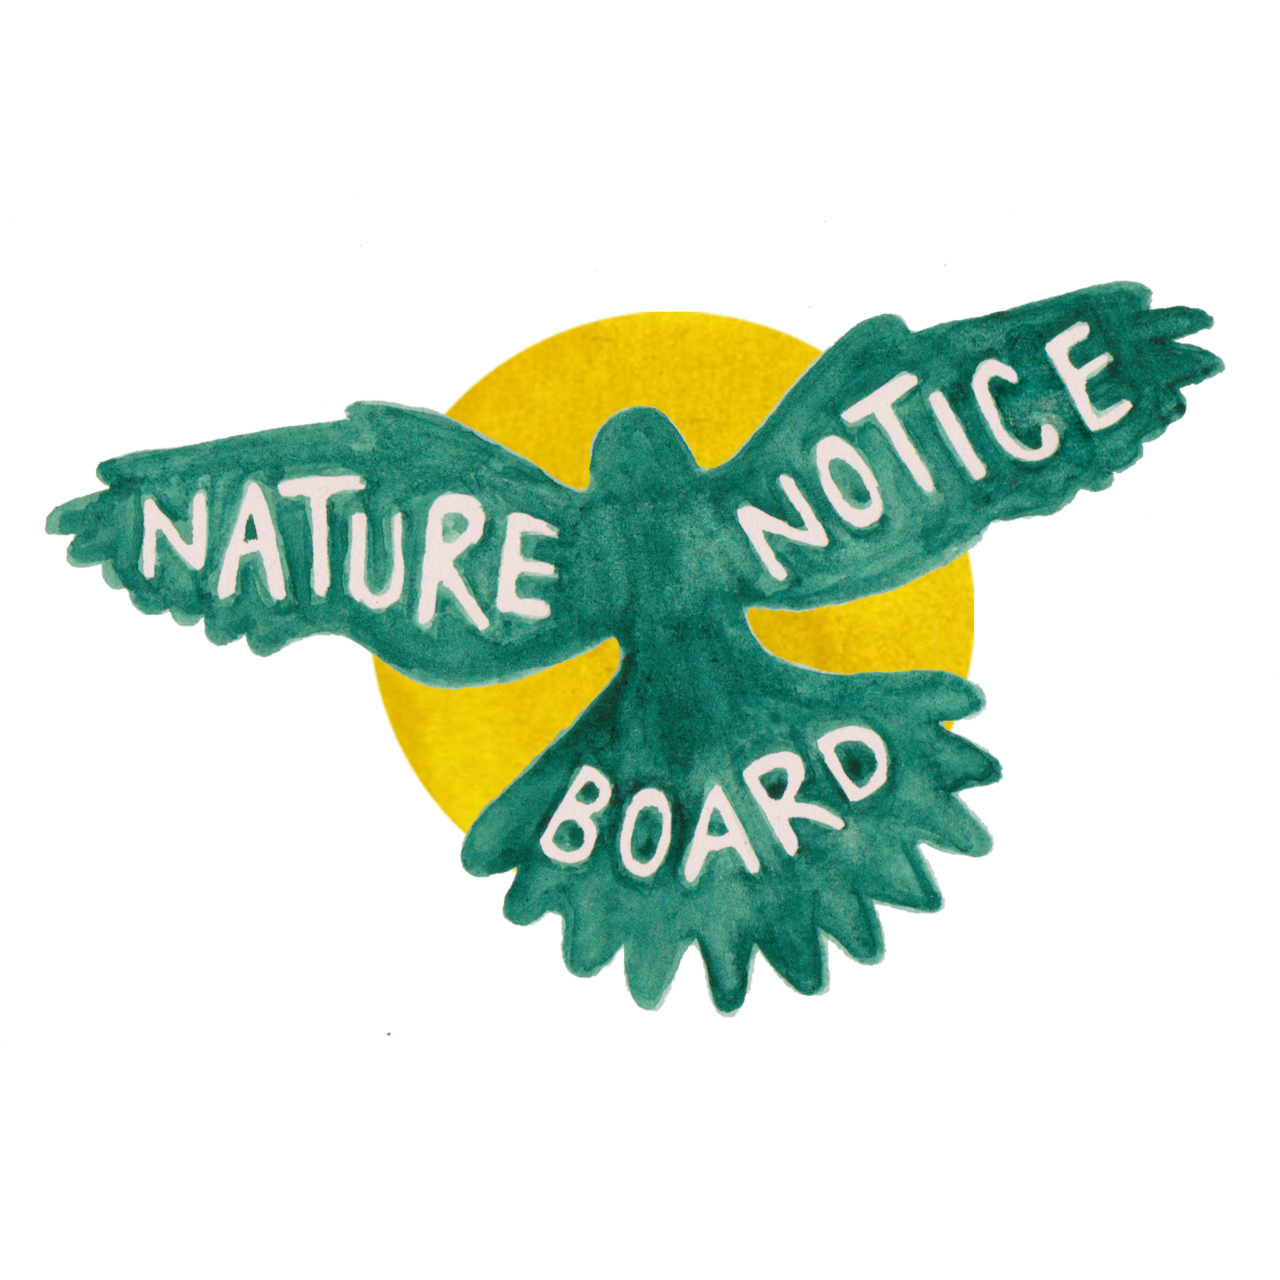 Artwork for The Nature Notice Board Newsletter